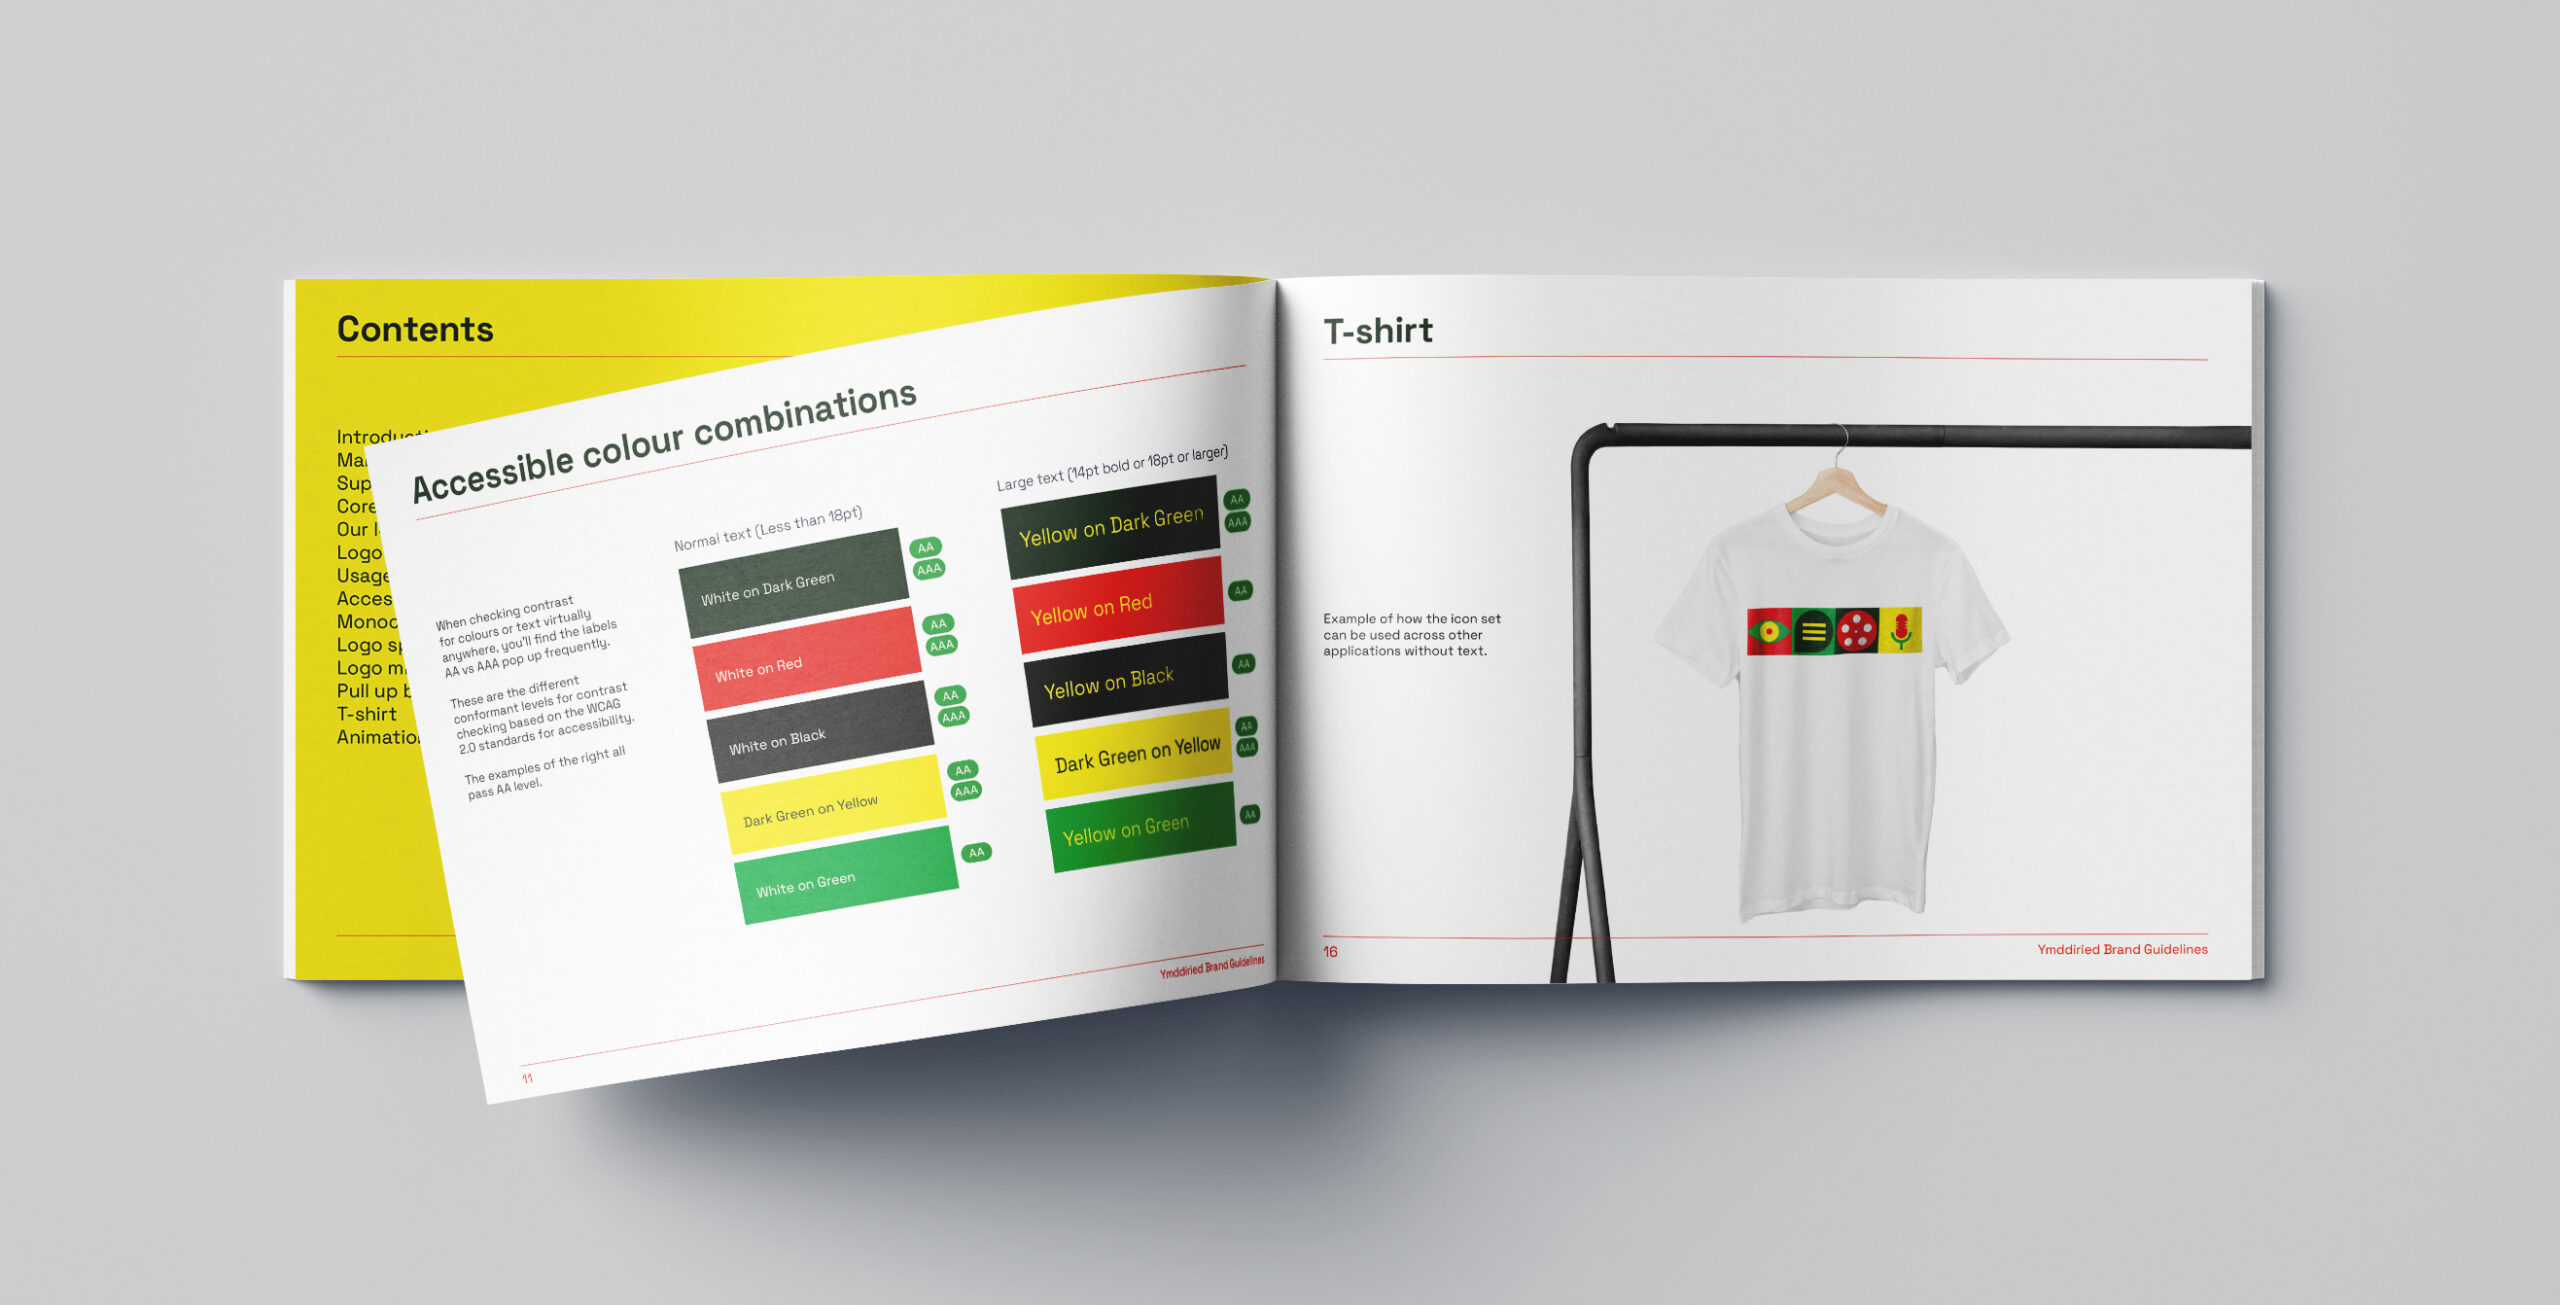 Ymddiried Brand Guidelines document showing accessible colour combinations on the left page, and branded Ymddiried t-shirt on the right page.